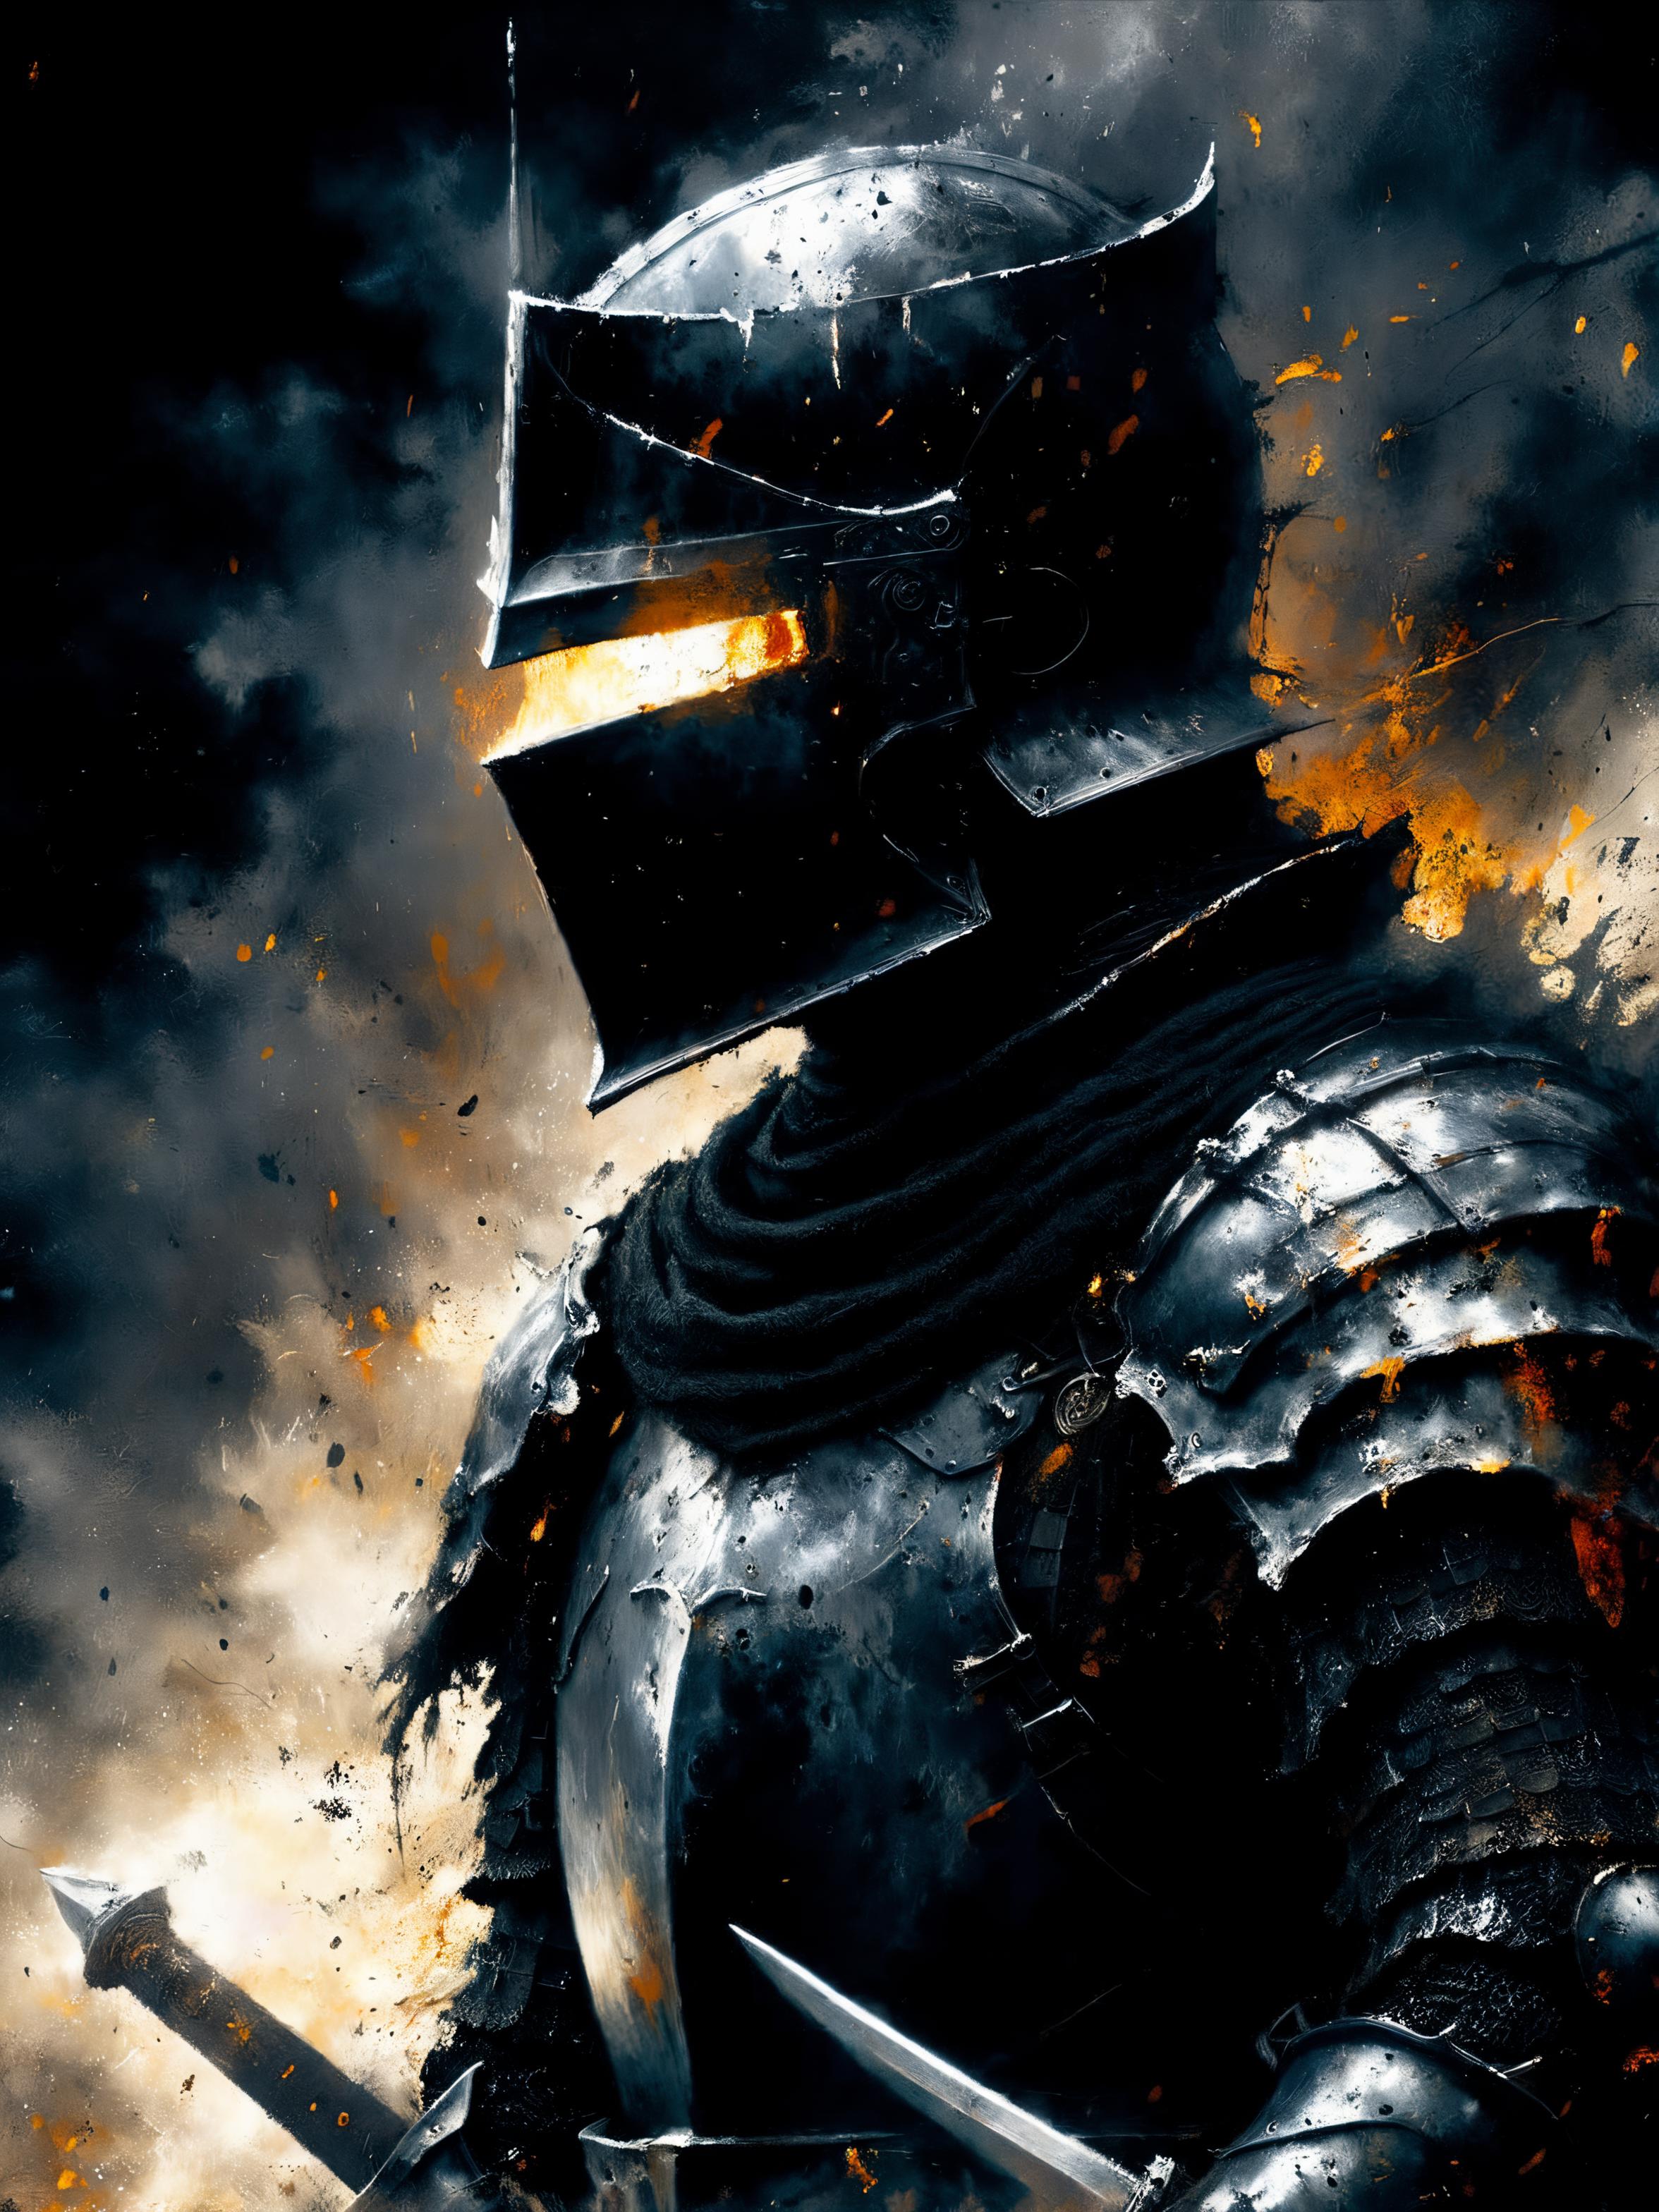 A dark and dramatic image of a knight in a suit of armor, holding a sword, and surrounded by fire and smoke.